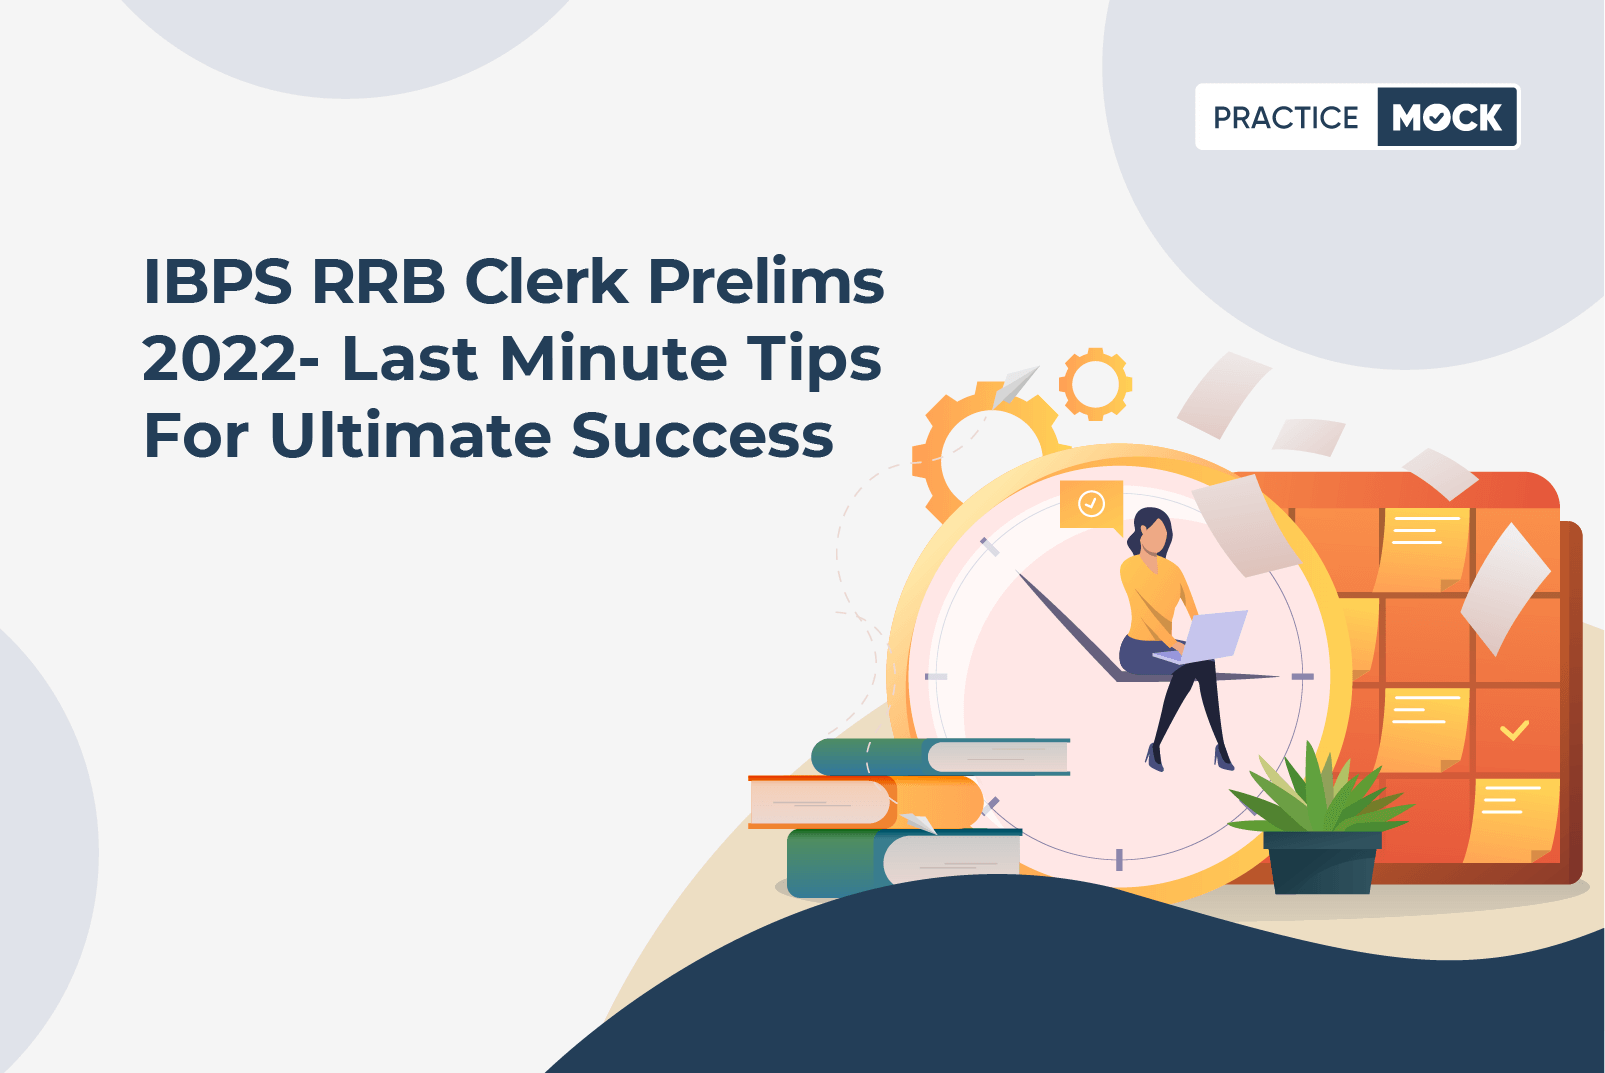 RRB Clerk Prelims 2022 Exam-Last Minute Tips from Toppers